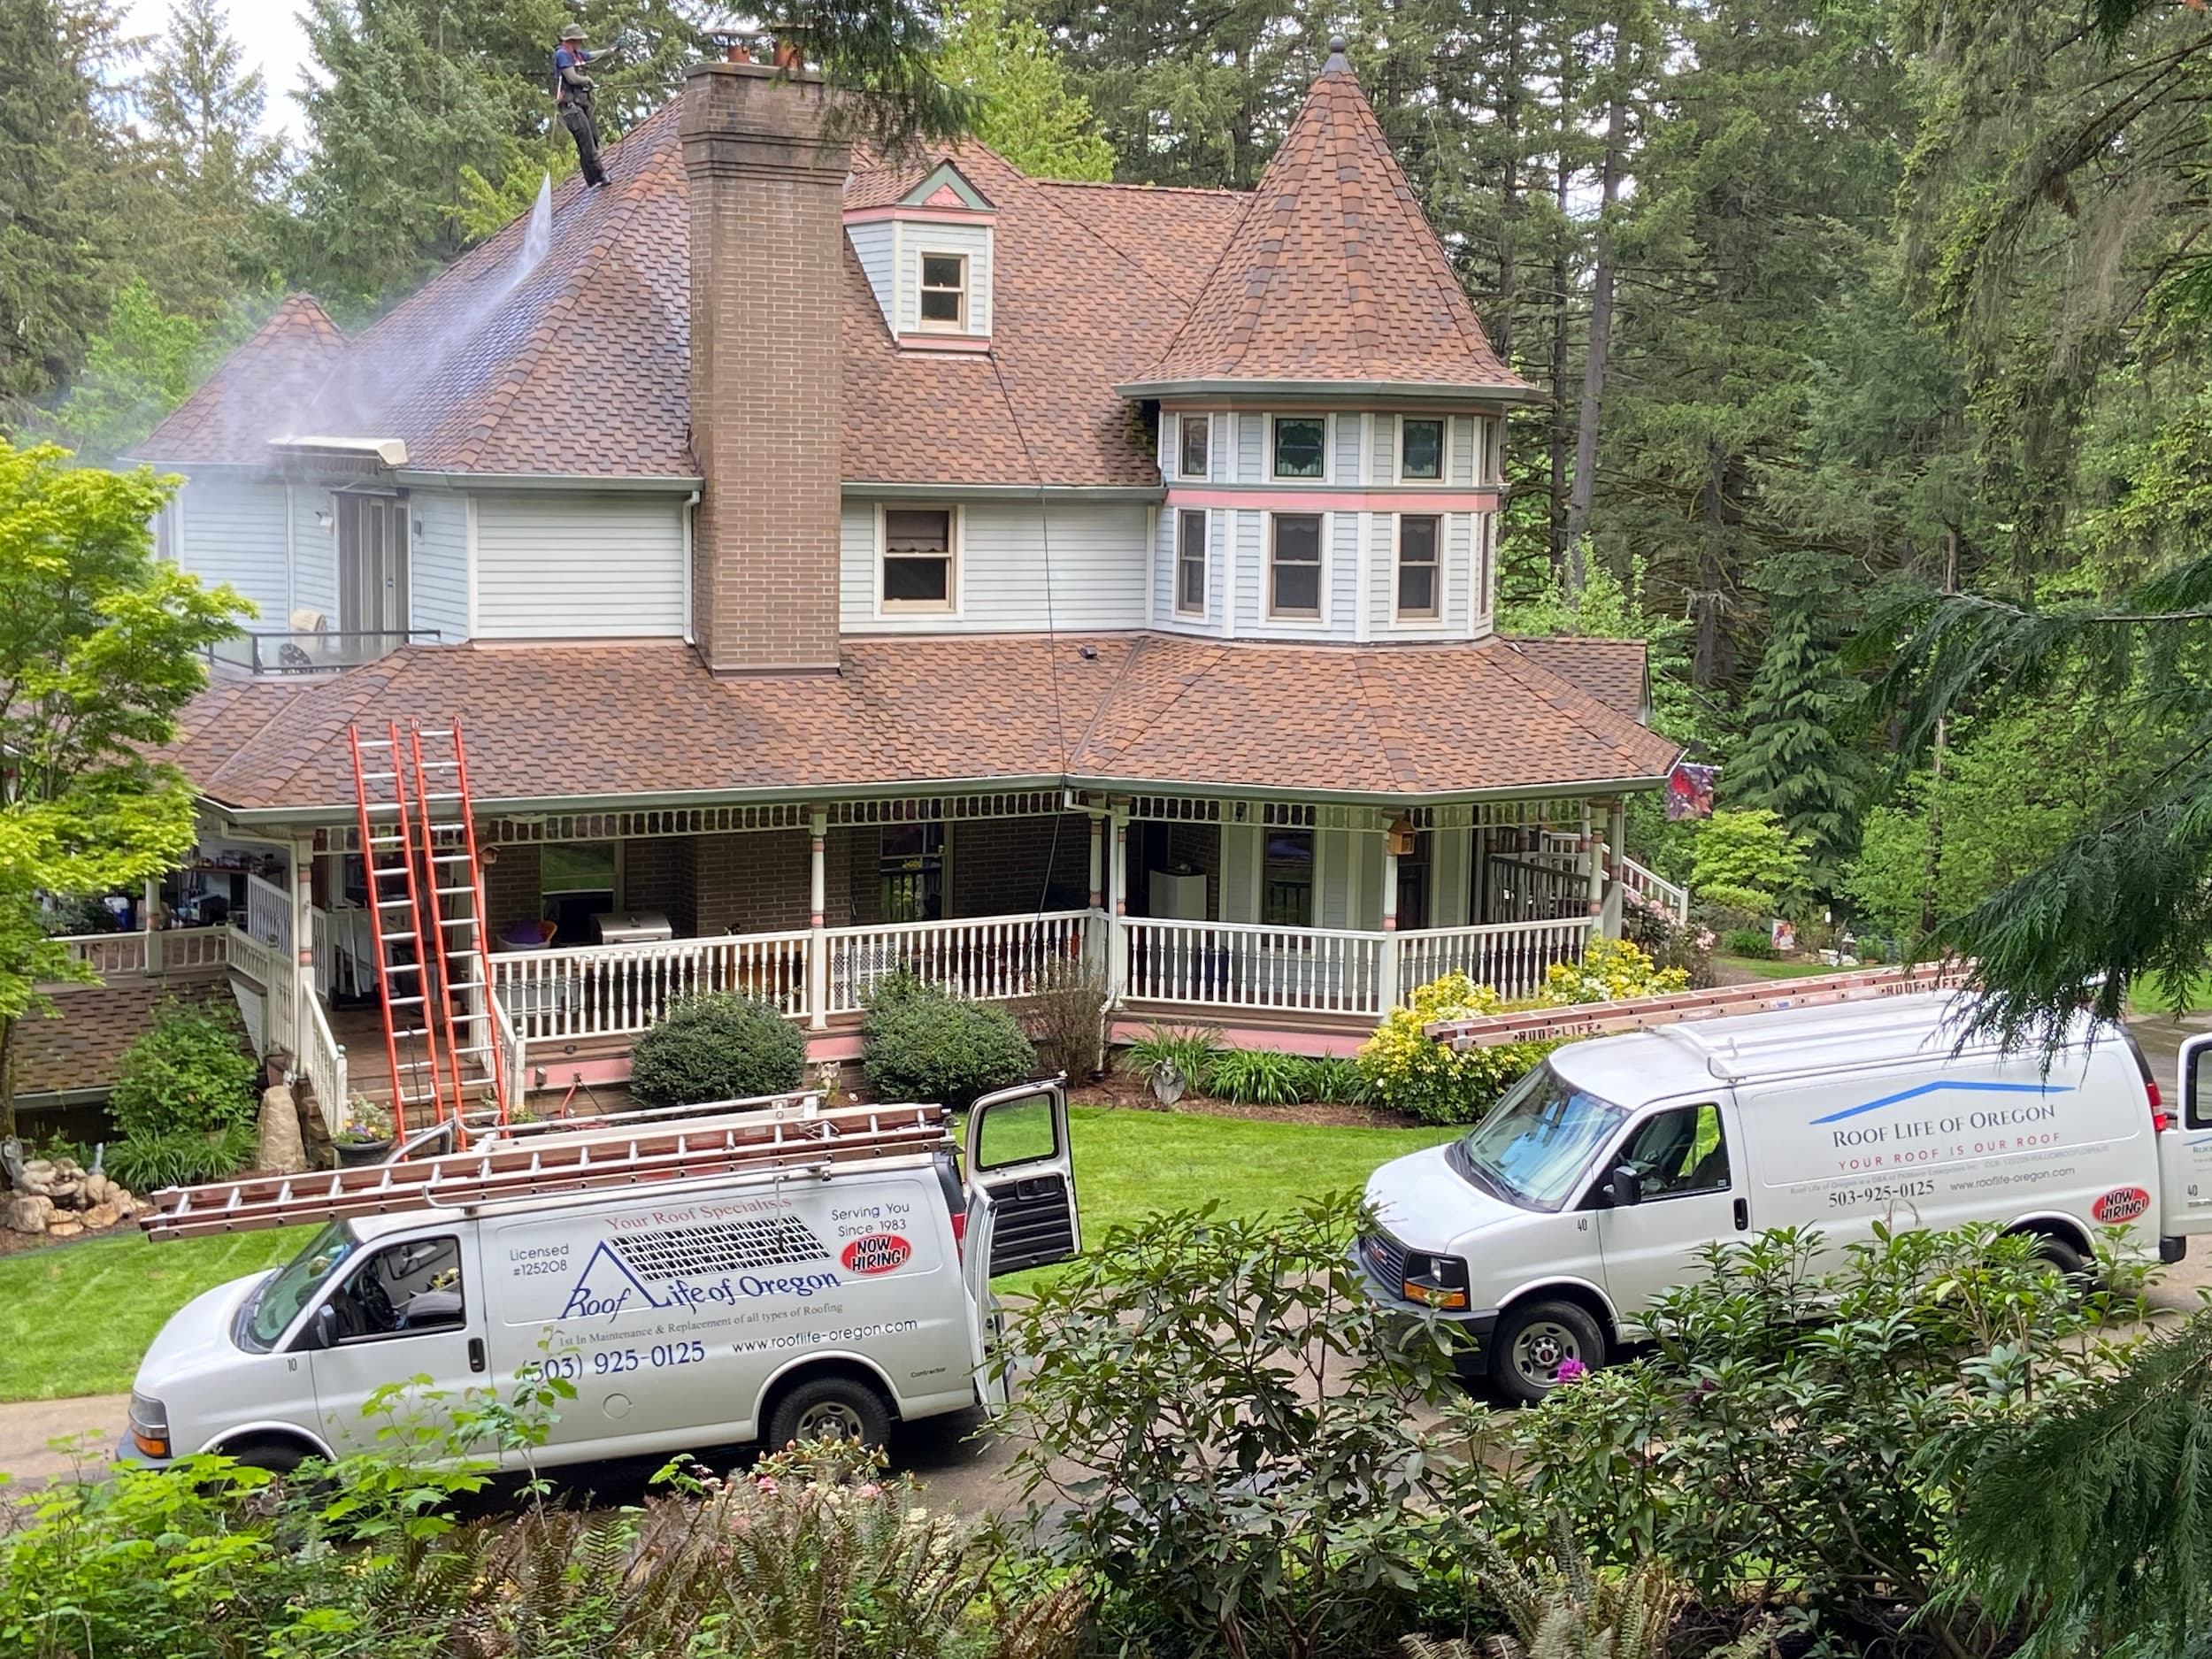 A portland-area home having its roof repaired